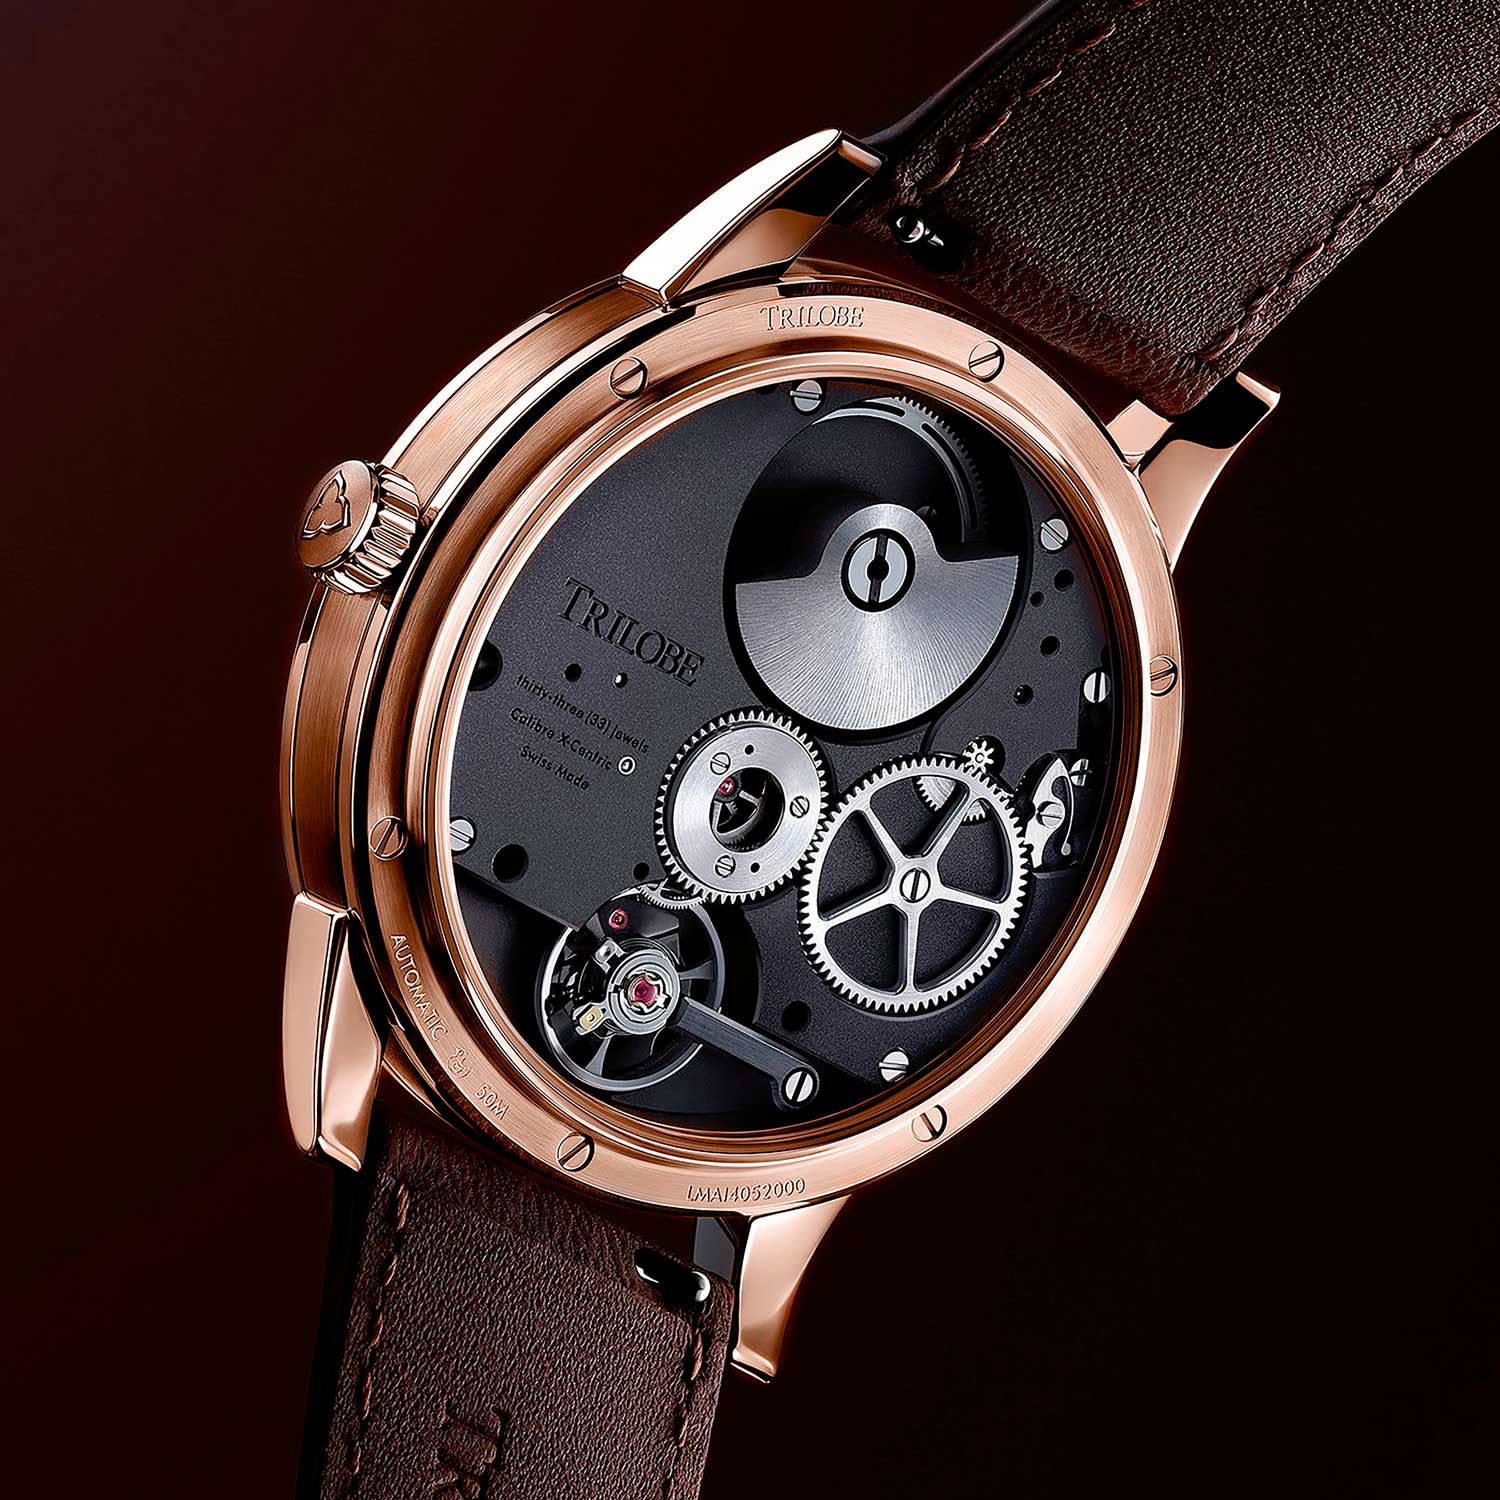 This movement can be viewed through the sapphire casebacks of Trilobe’s watches